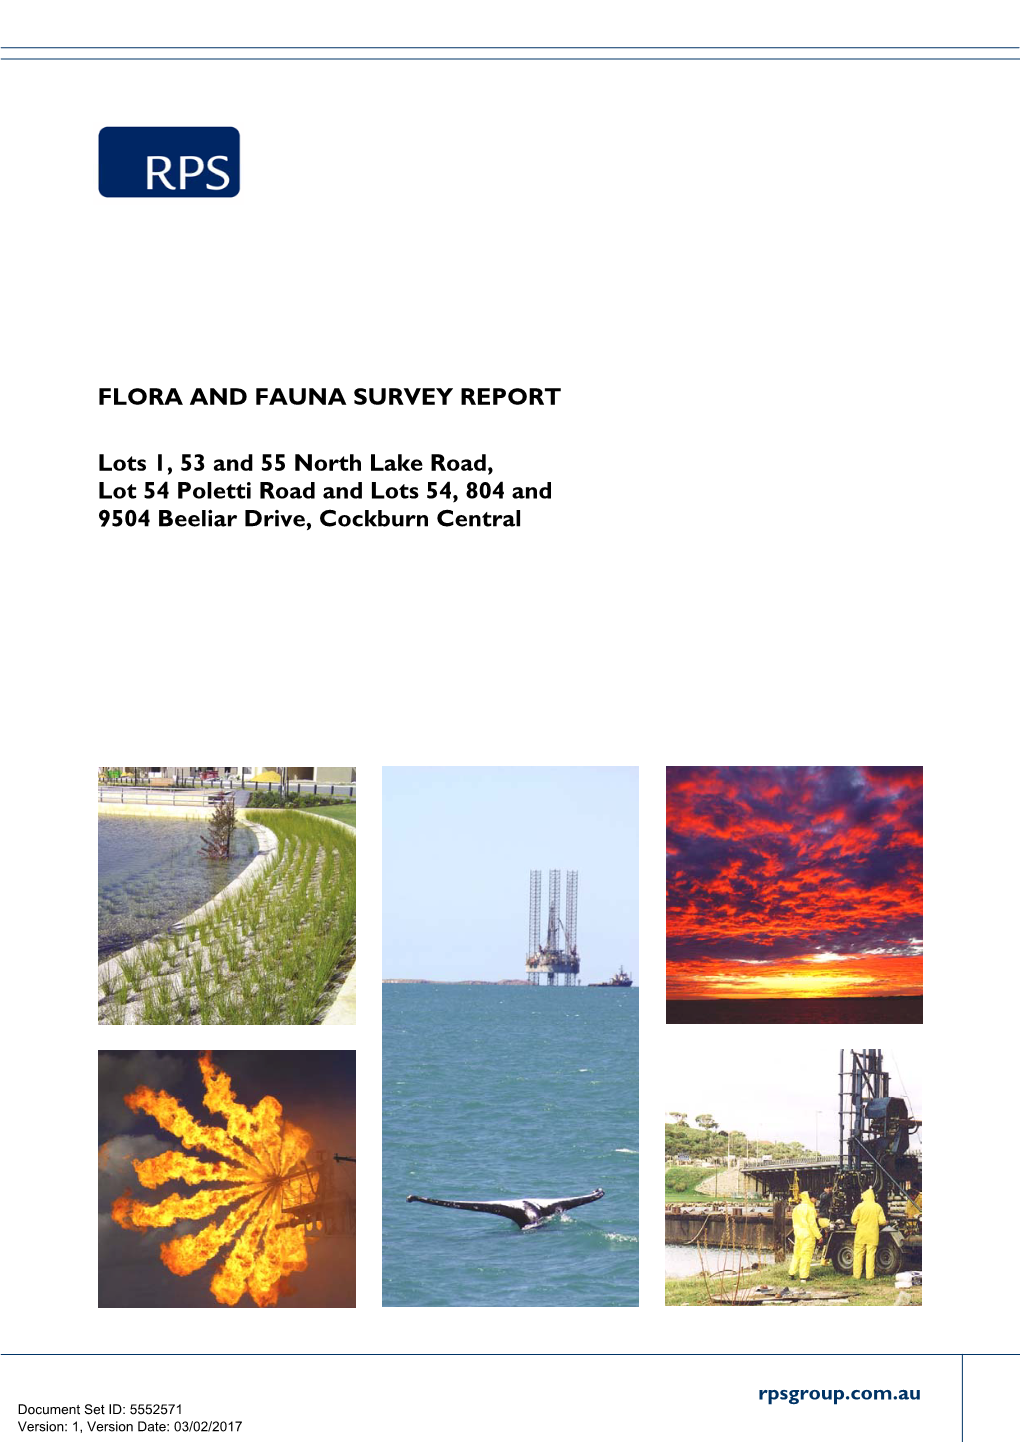 RPS Flora and Fauna Report